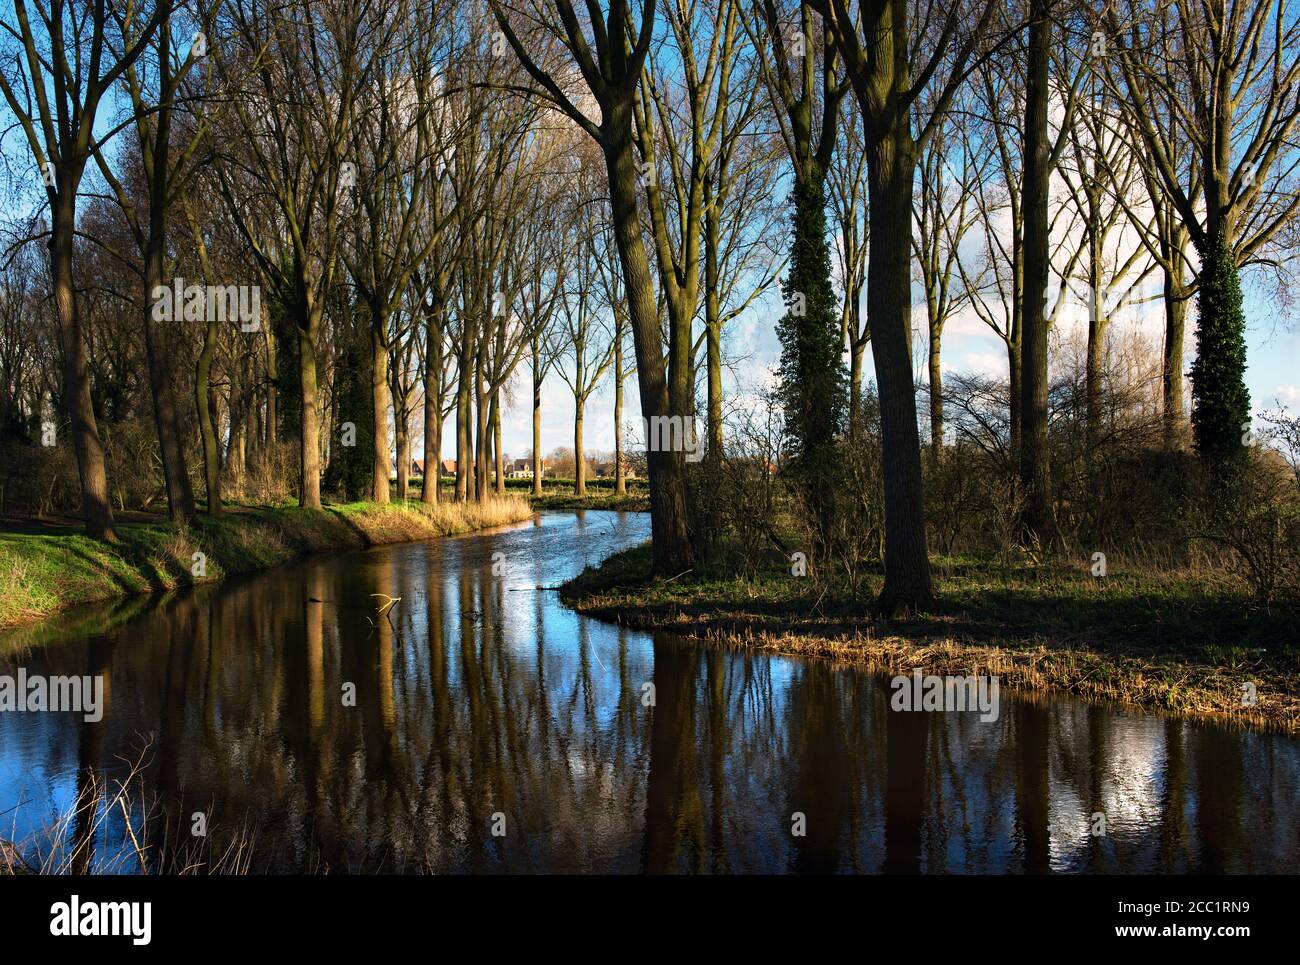 A picturesque woodland scene in the little village of Damme, in Belgium Stock Photo